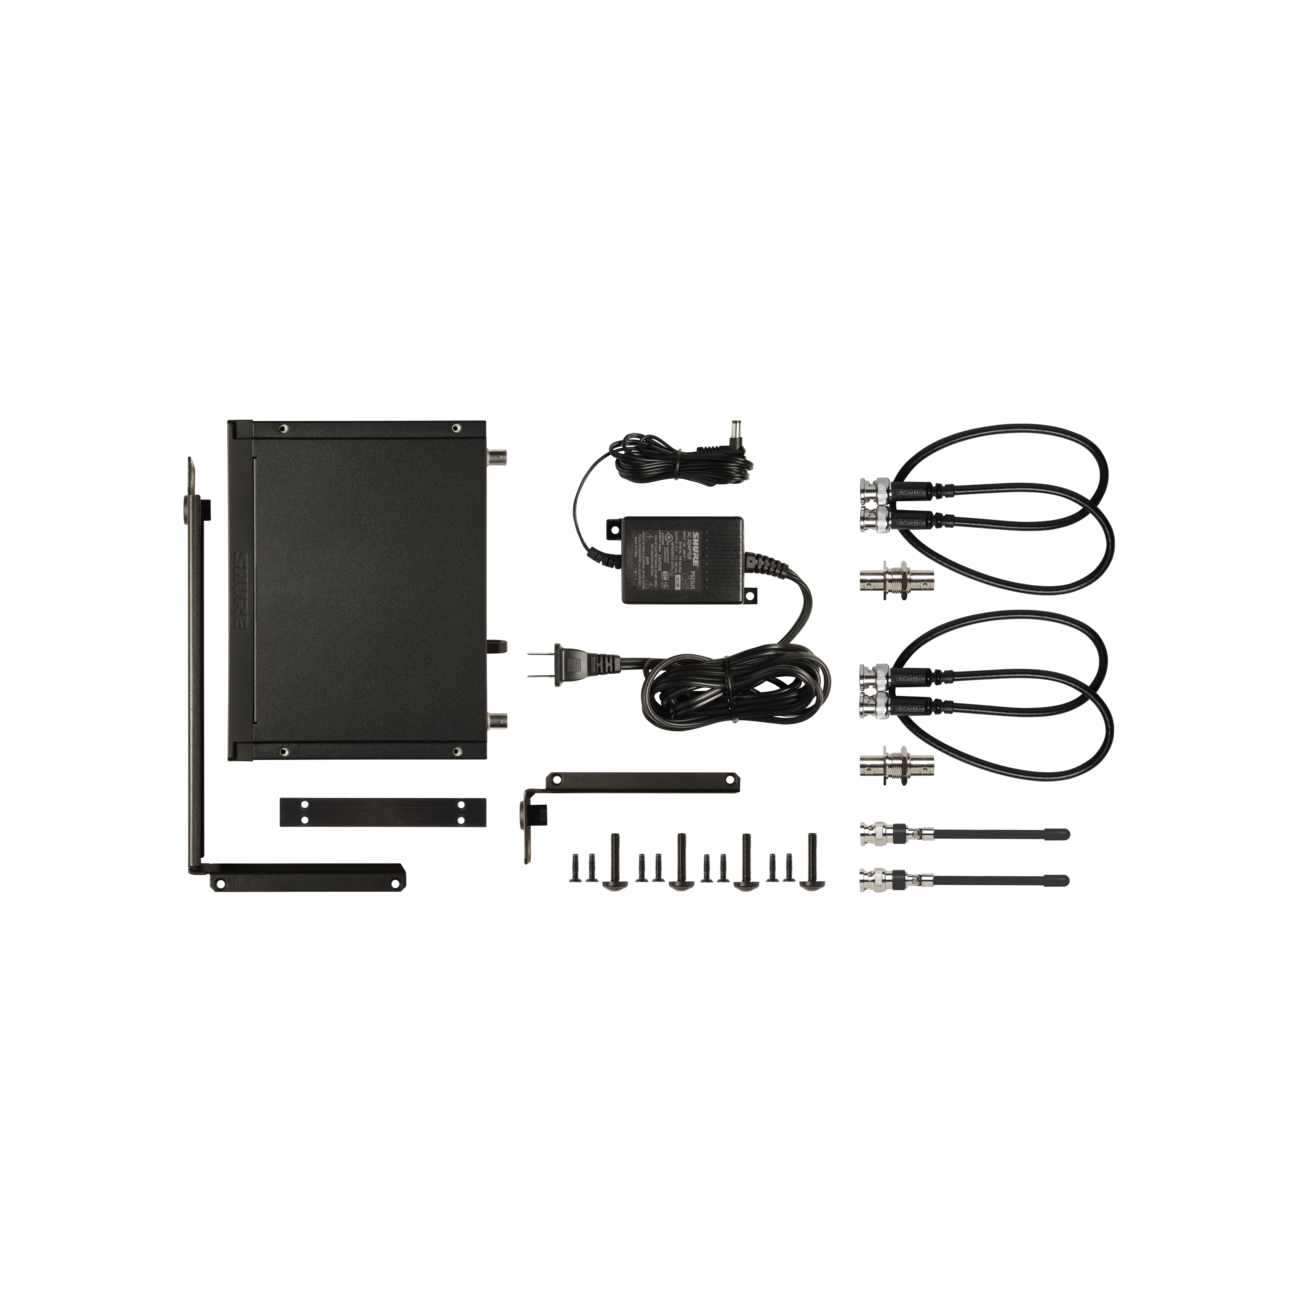 Shure BLX14R/MX53 Wireless Rack-Mount Presenter System with MX153 Earset Mic, H10 542MHz-572MHz